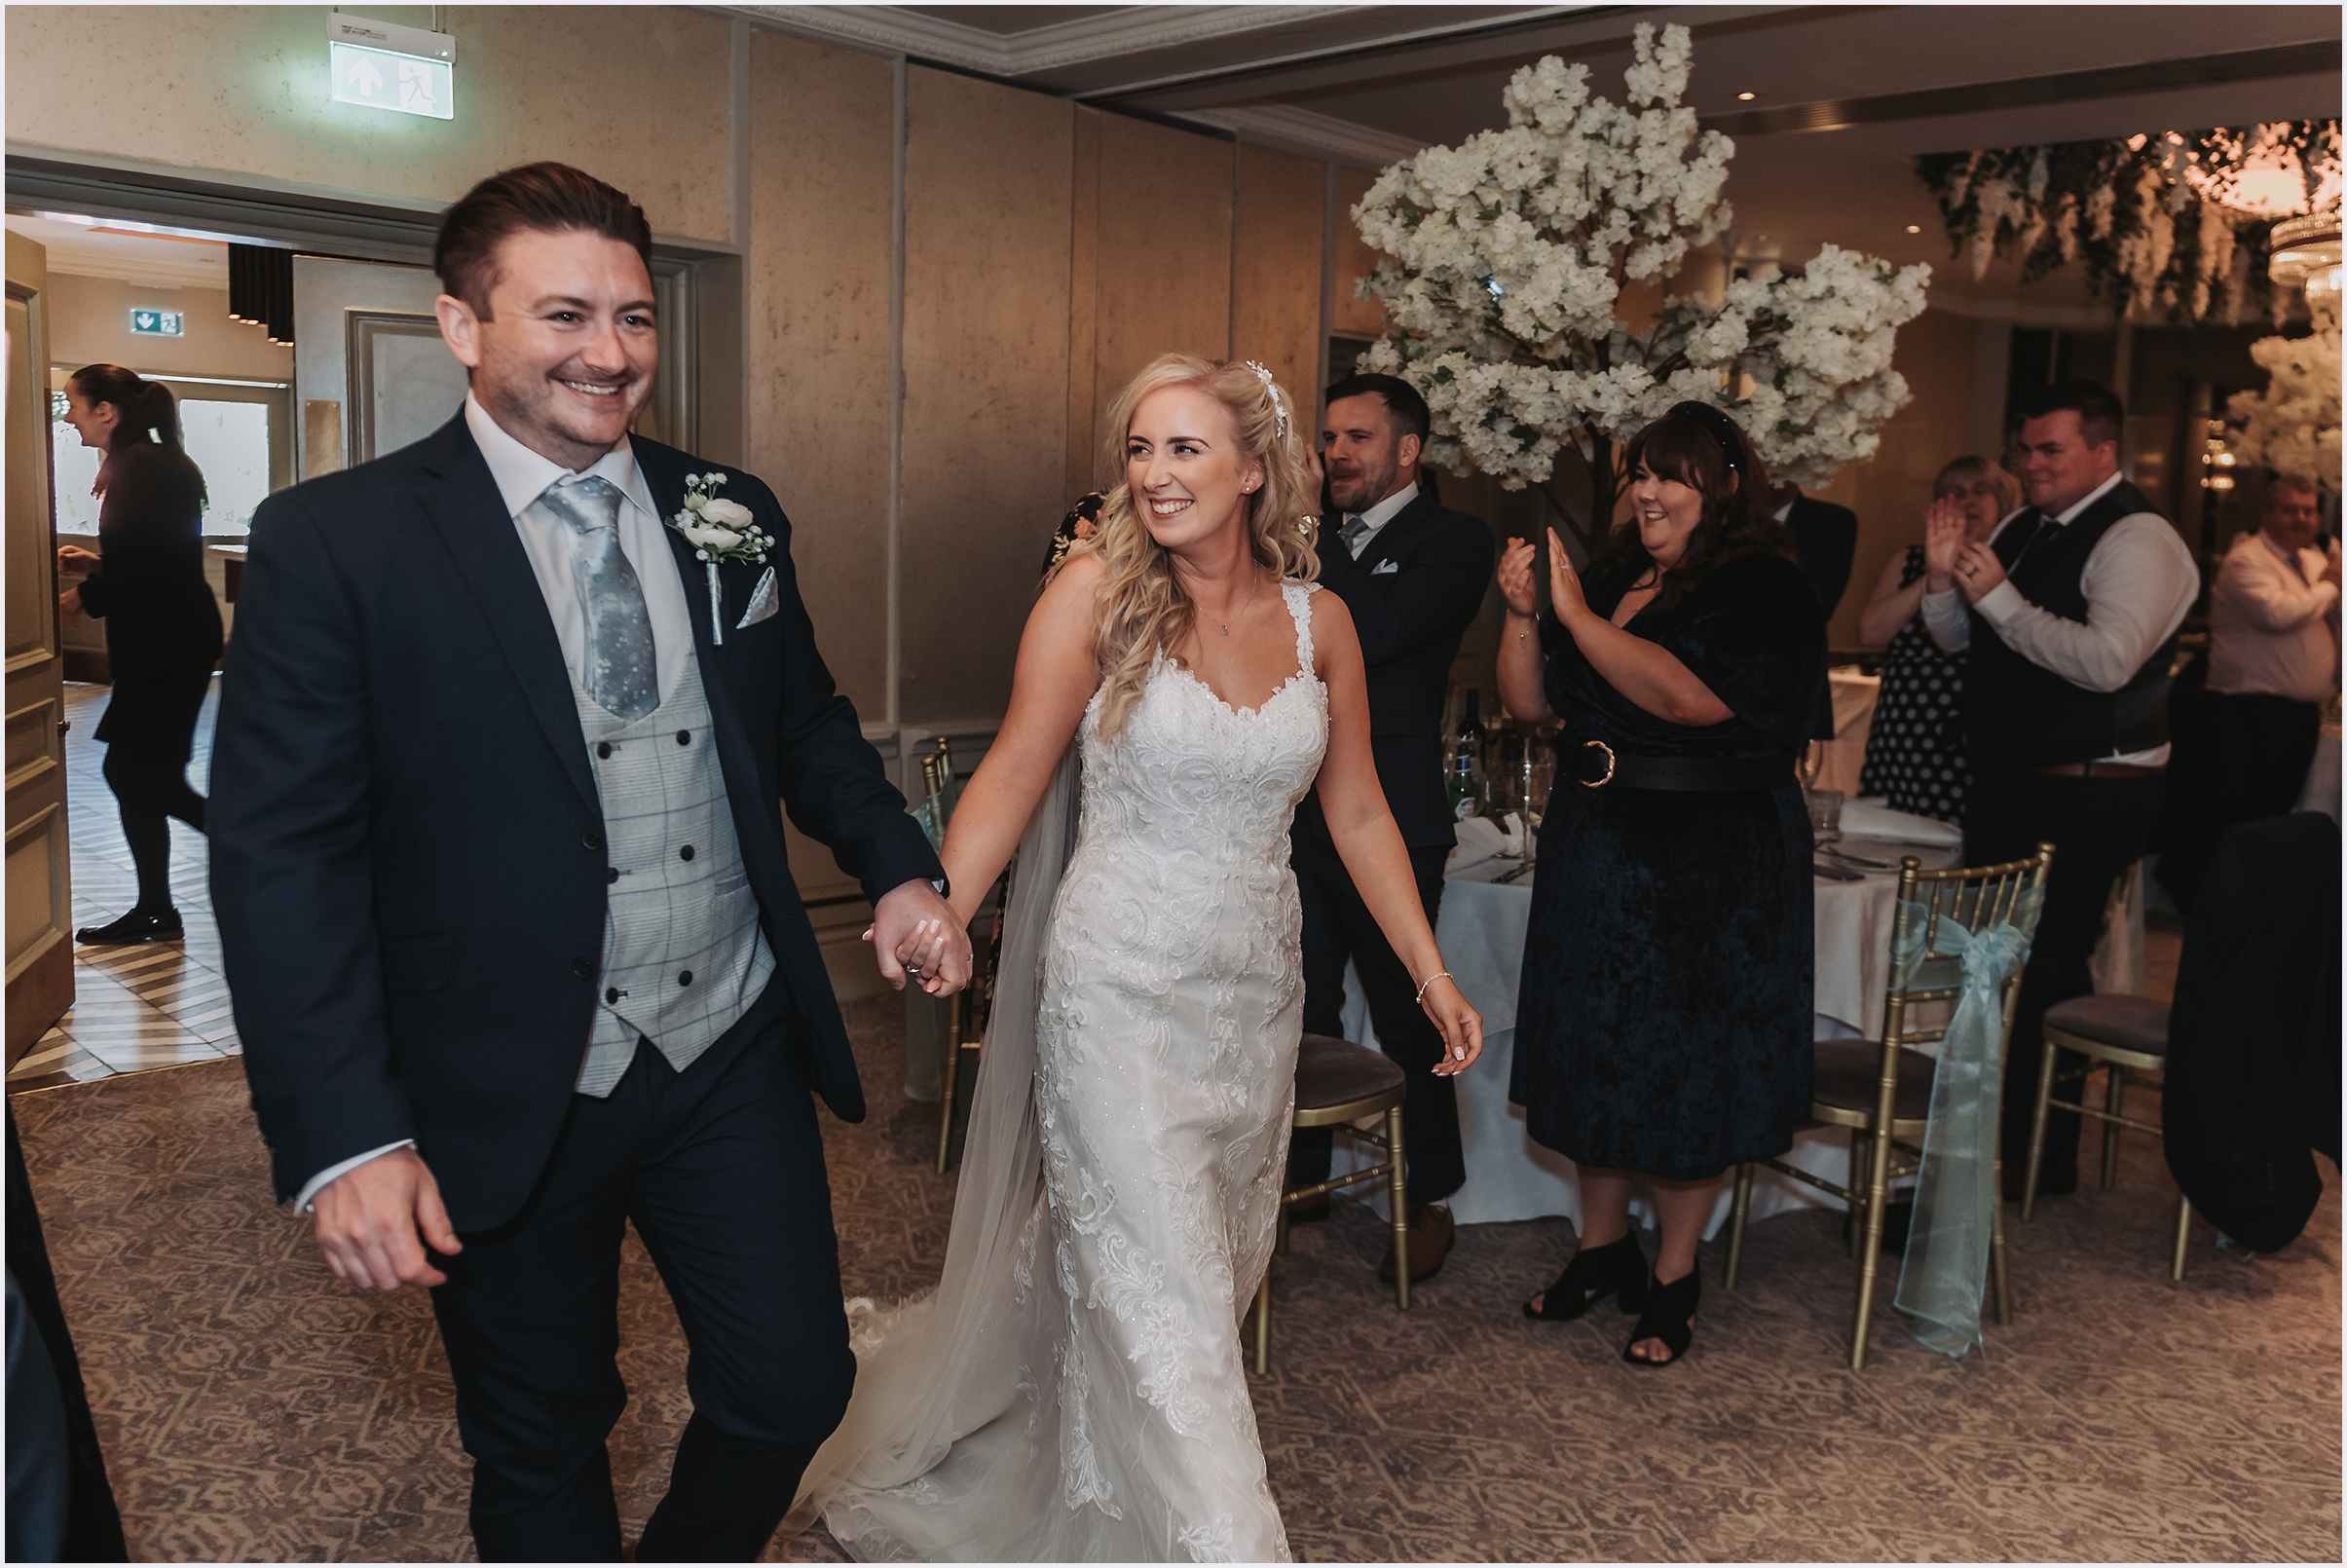 A bride and groom walking hand in hand smiling at each other as they enter the room where their wedding breakfast will be served at The Grosvebor Pulford Hotel and Spa.